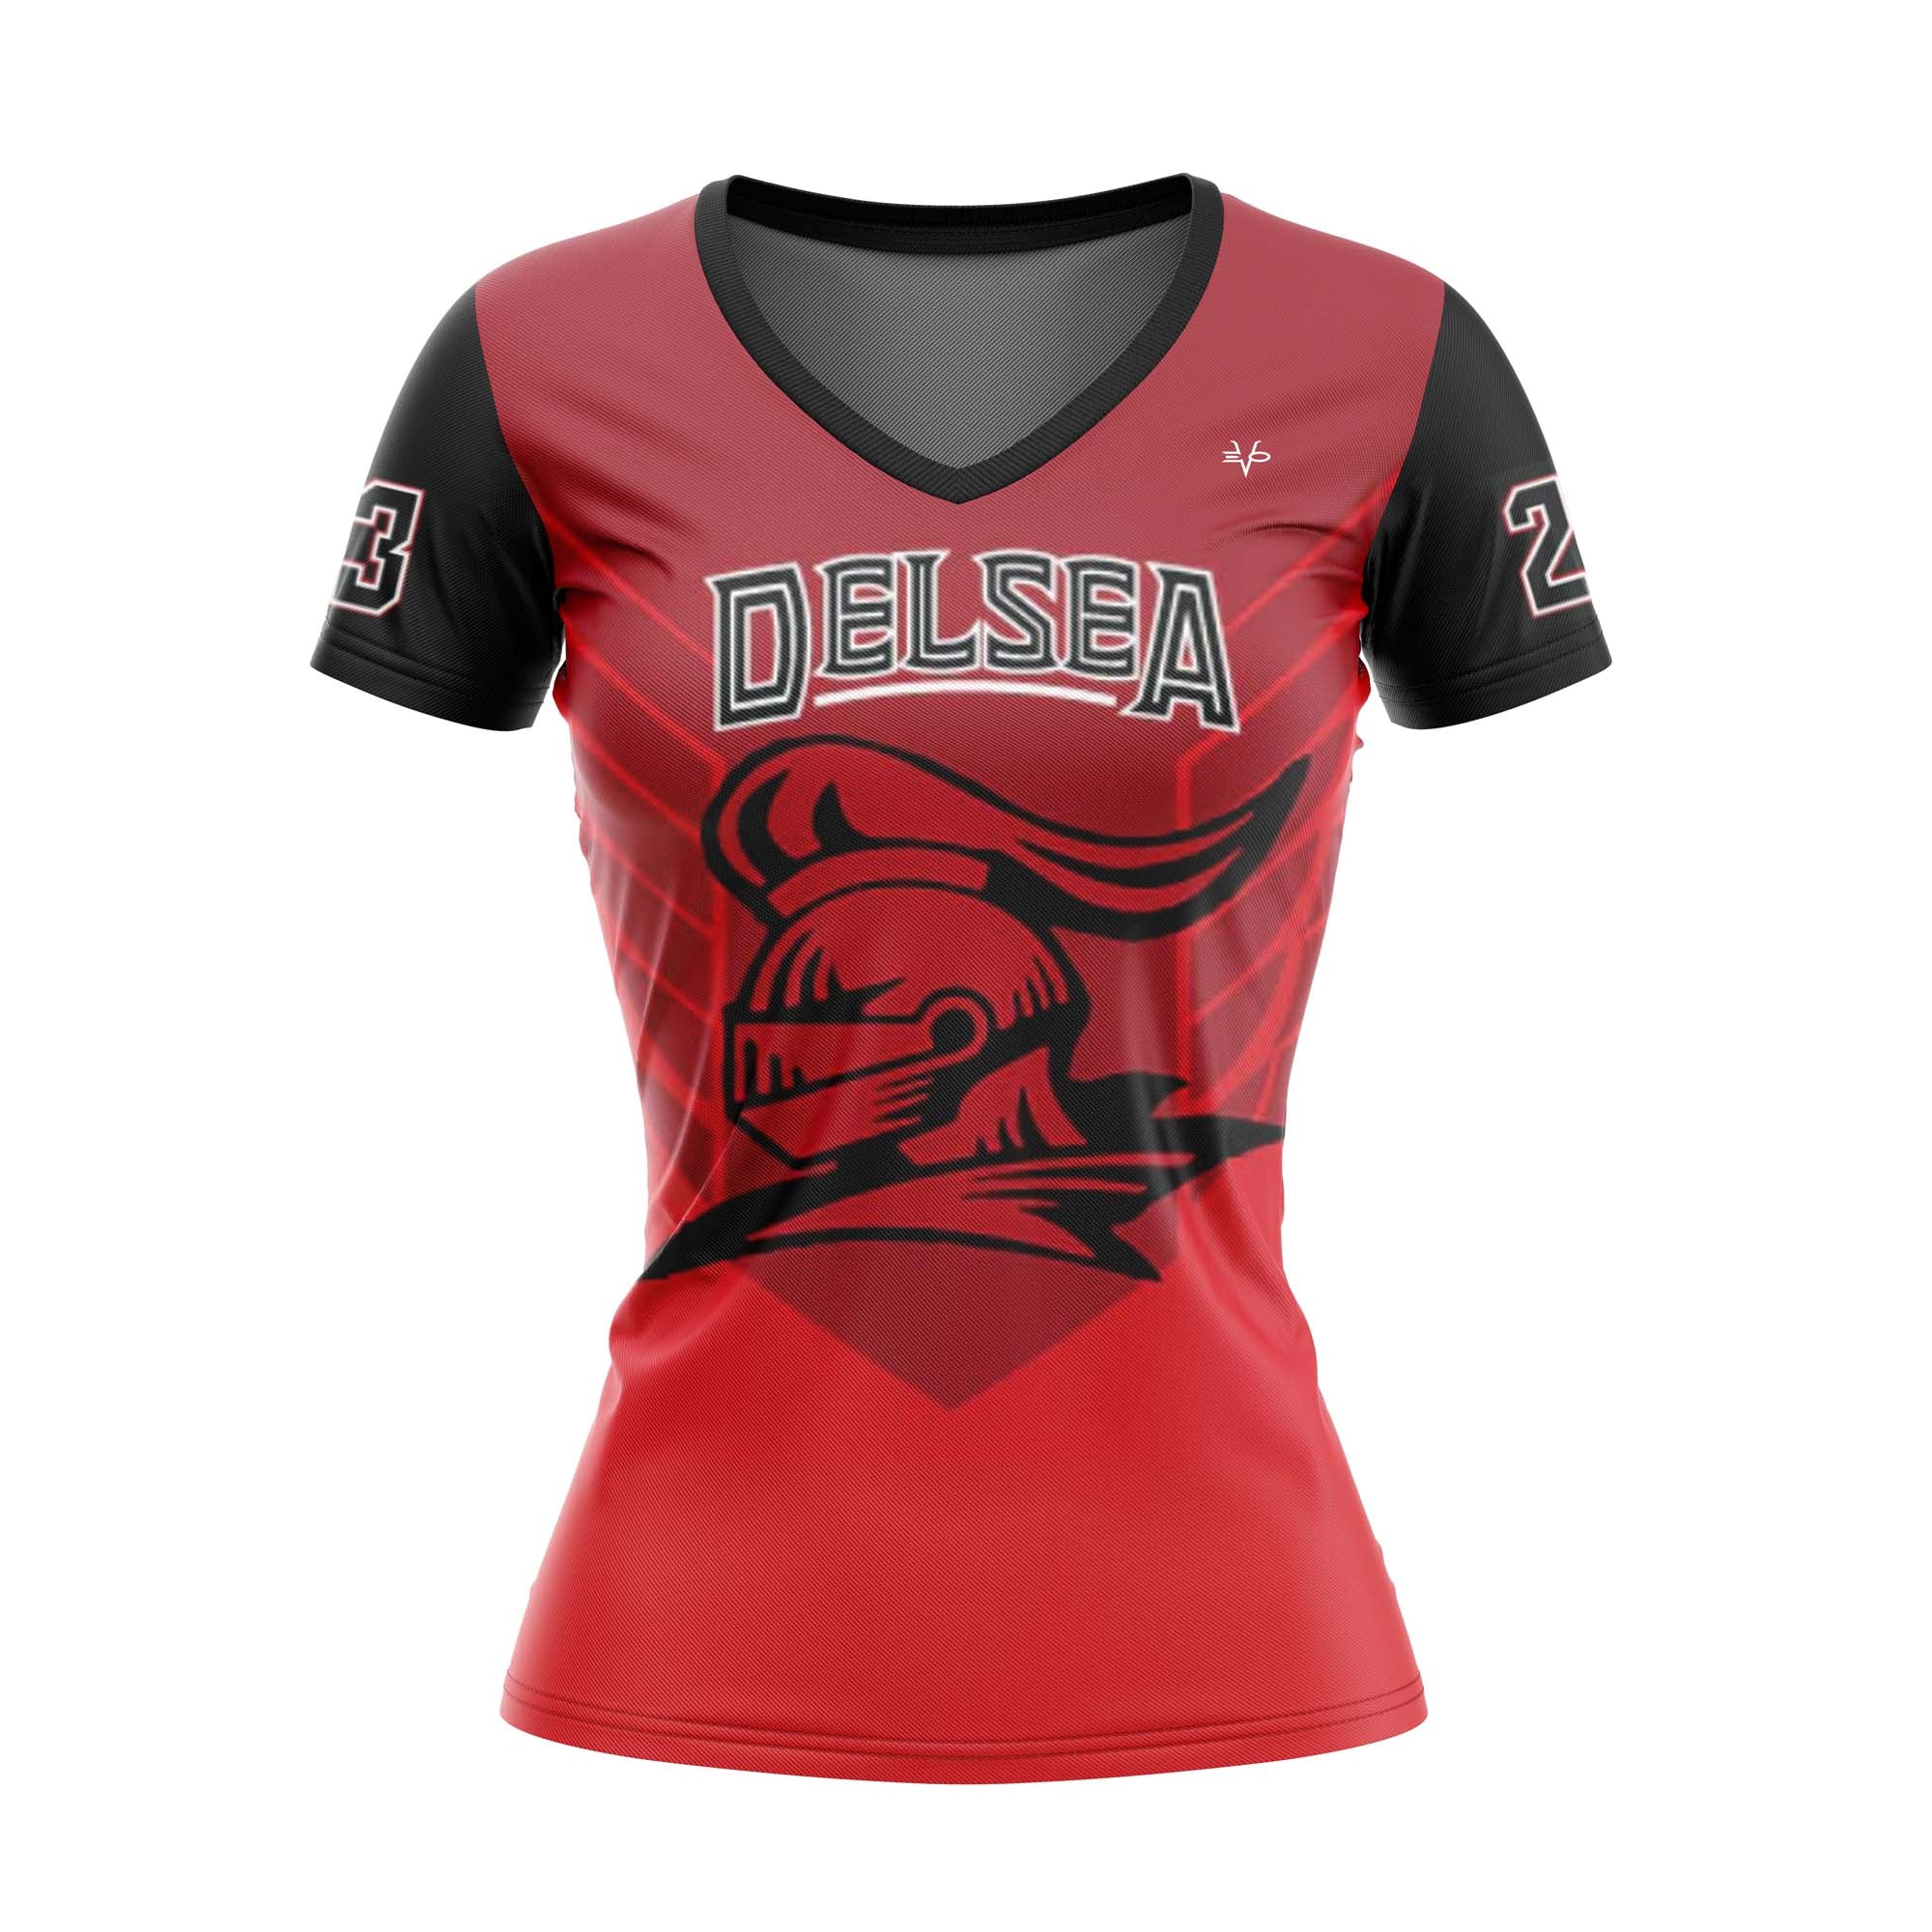 DELSEA KNIGHTS Football Sublimated Women's Cap Sleeve Shirt